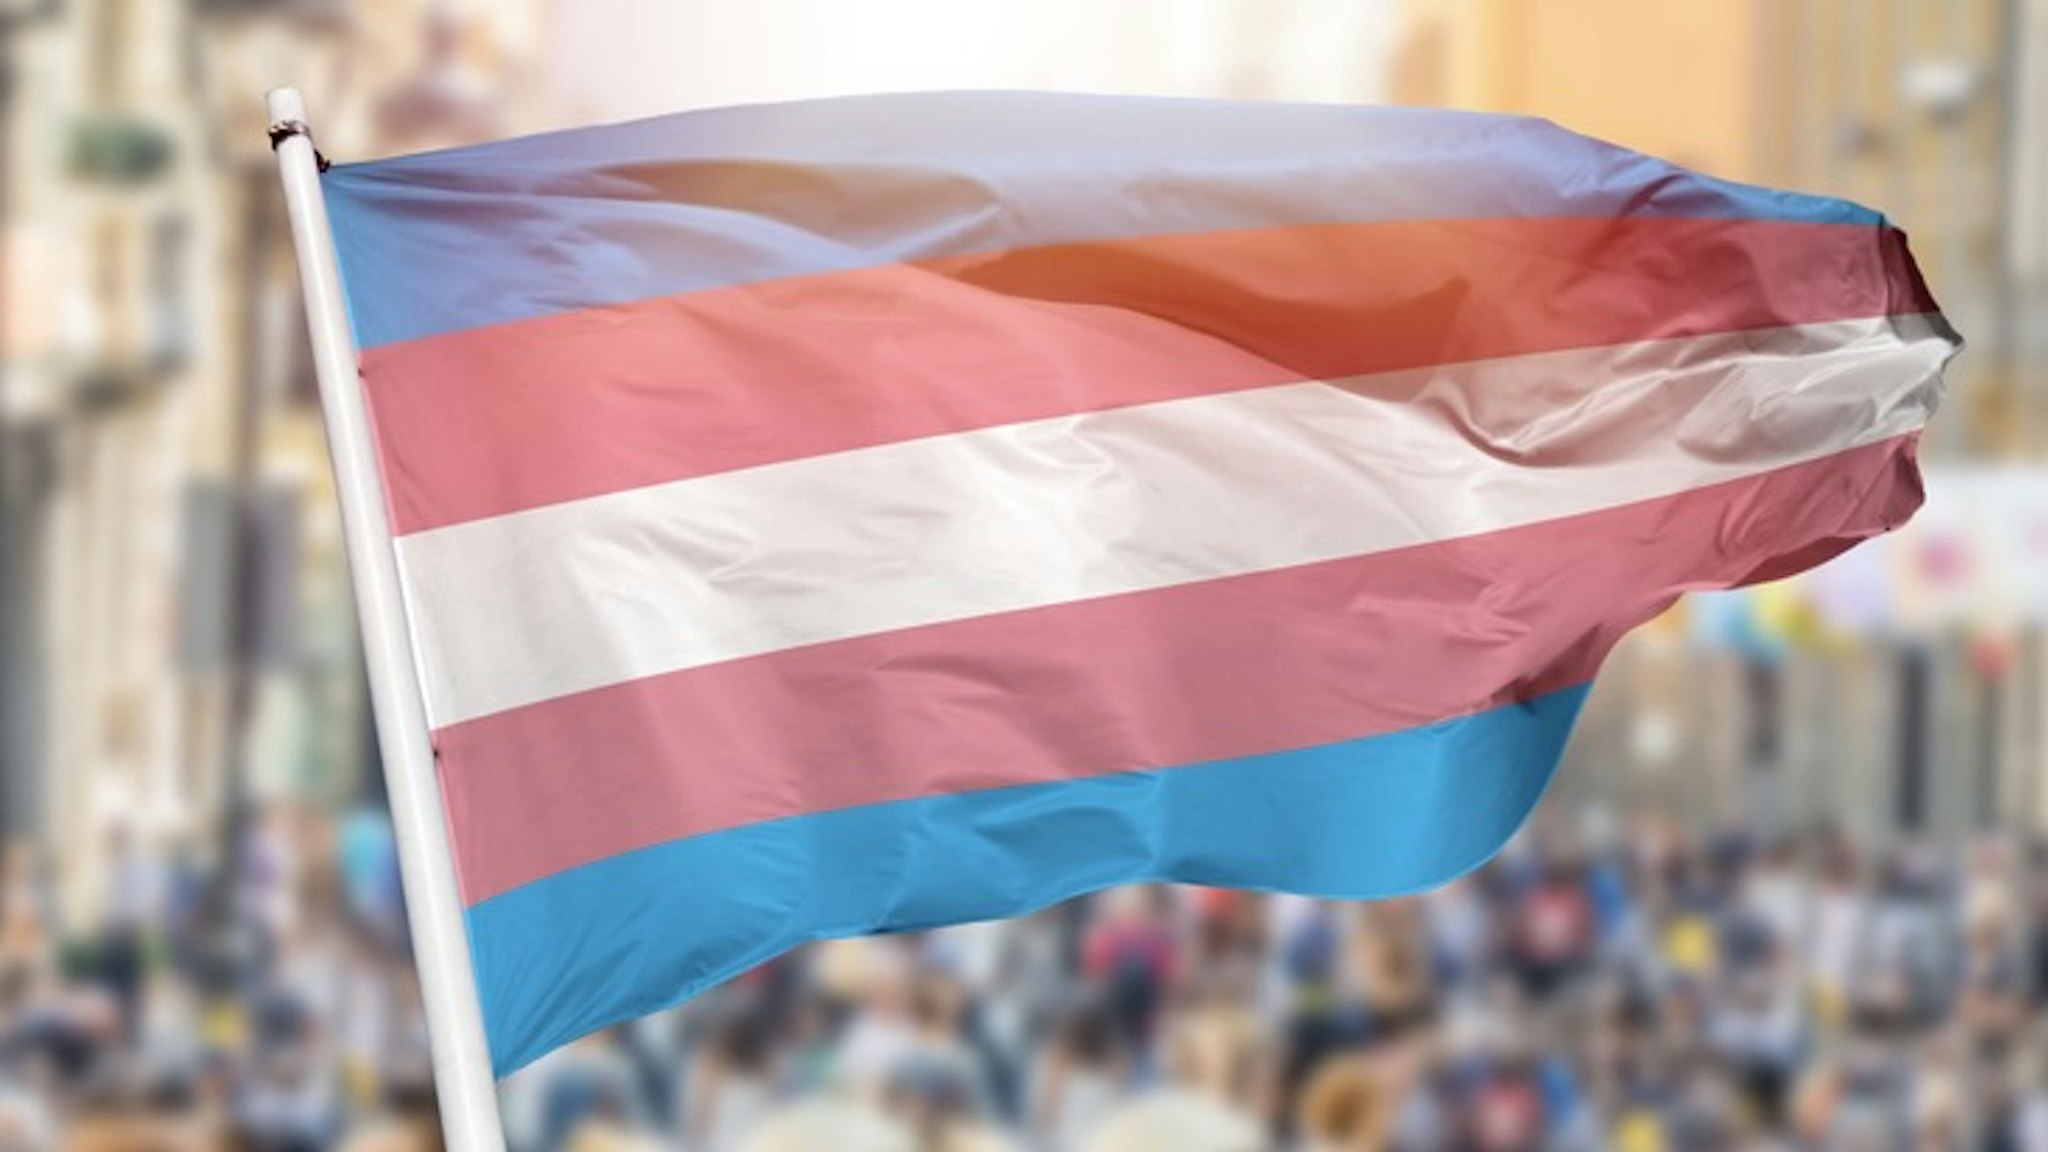 transgender flag blowing - stock photo Shot of the transgender flag blowing in the wind at street Cunaplus_M.Faba via Getty Images